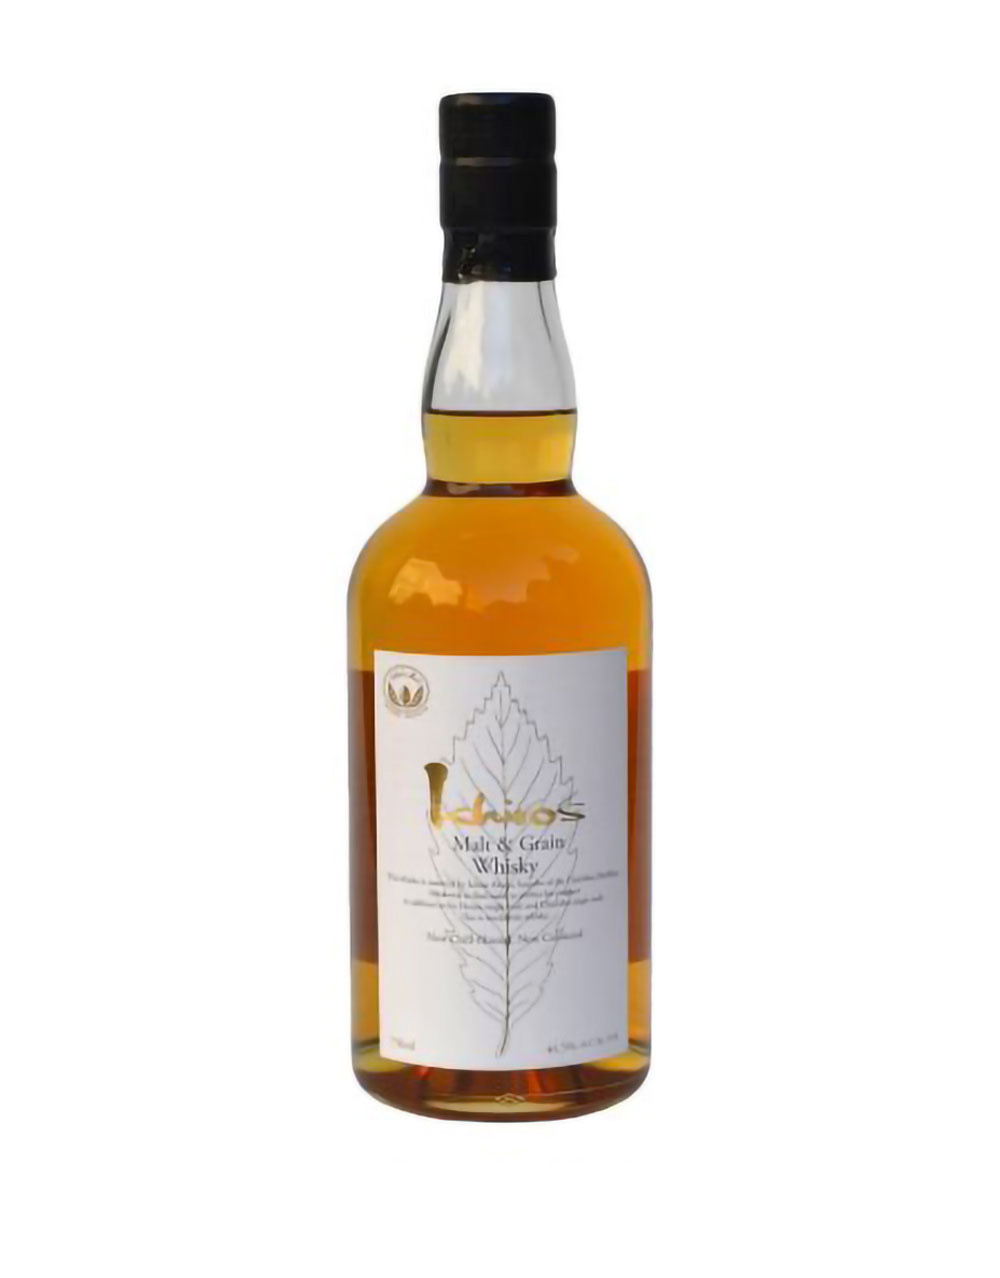 ALFRED GIRAUD HERITAGE FRENCH MALT WHISKY